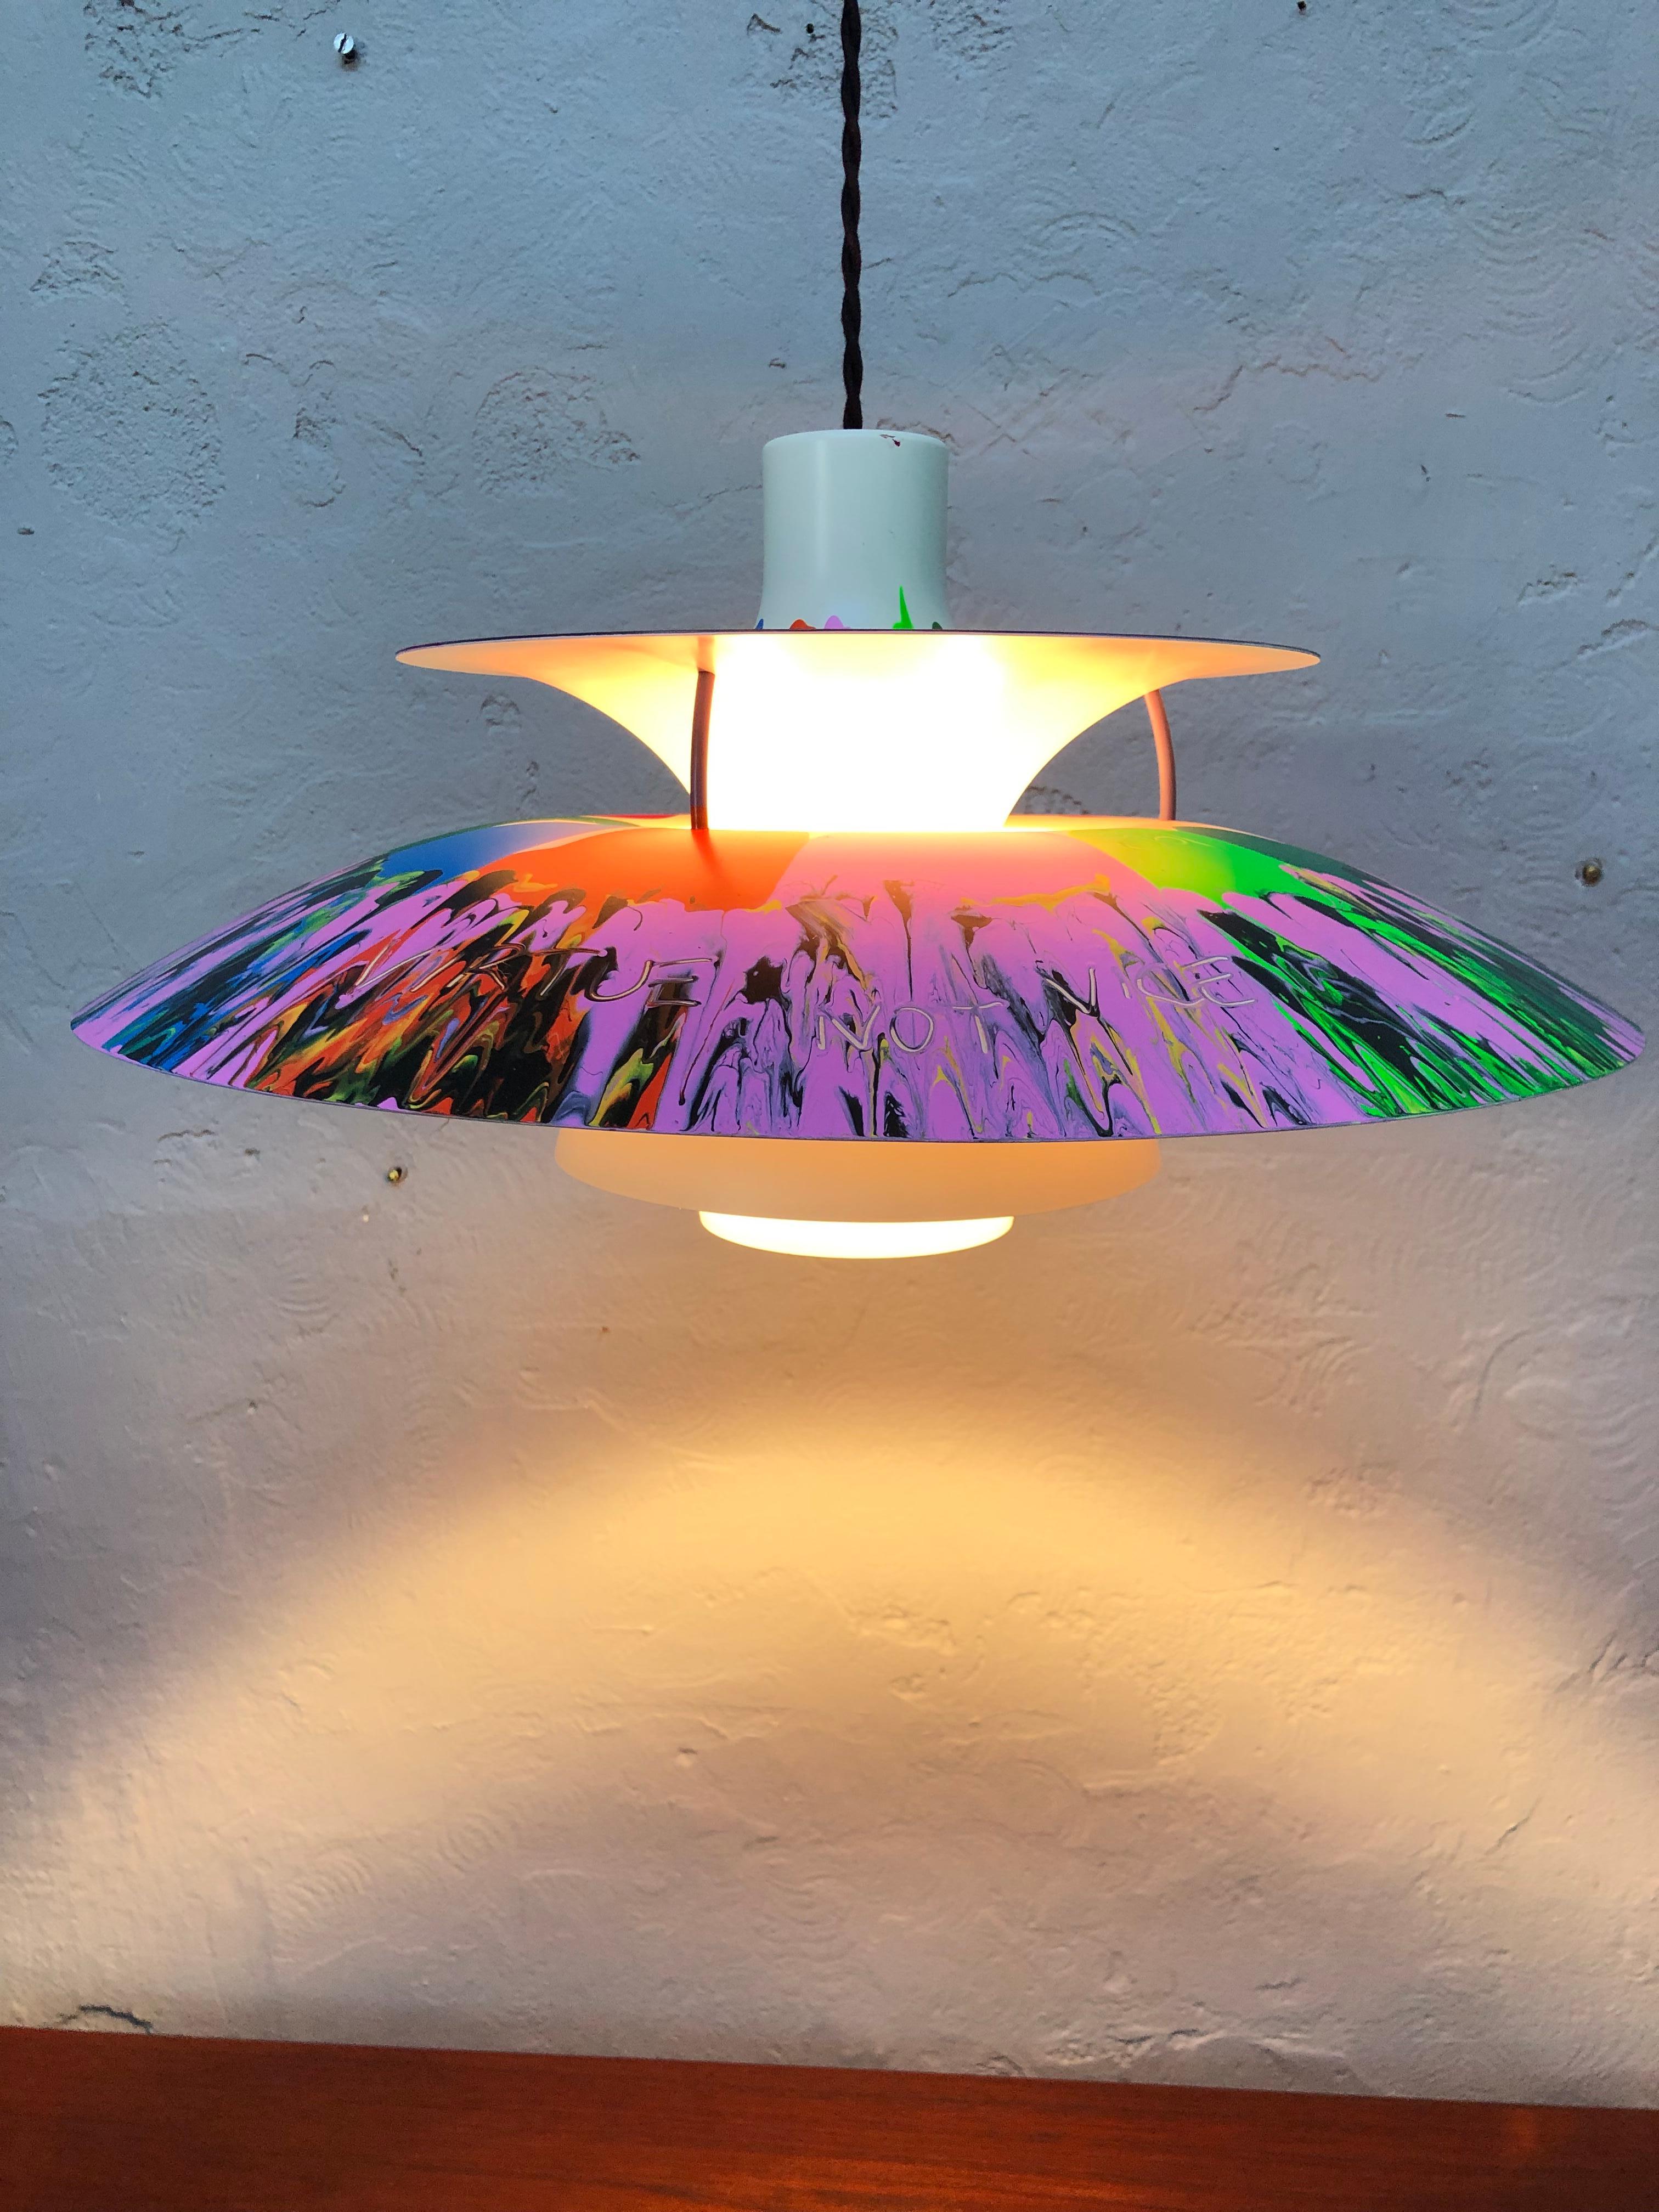 Iconic Vintage PH5 chandelier by Poul Henningsen for Louis Poulsen of Denmark from the 1970s with abstract art work by G61.
Titled “Virtue Not Vice” 
The art work is acrylic paint with a clear coat finish on top. 
All types of abstract art share a